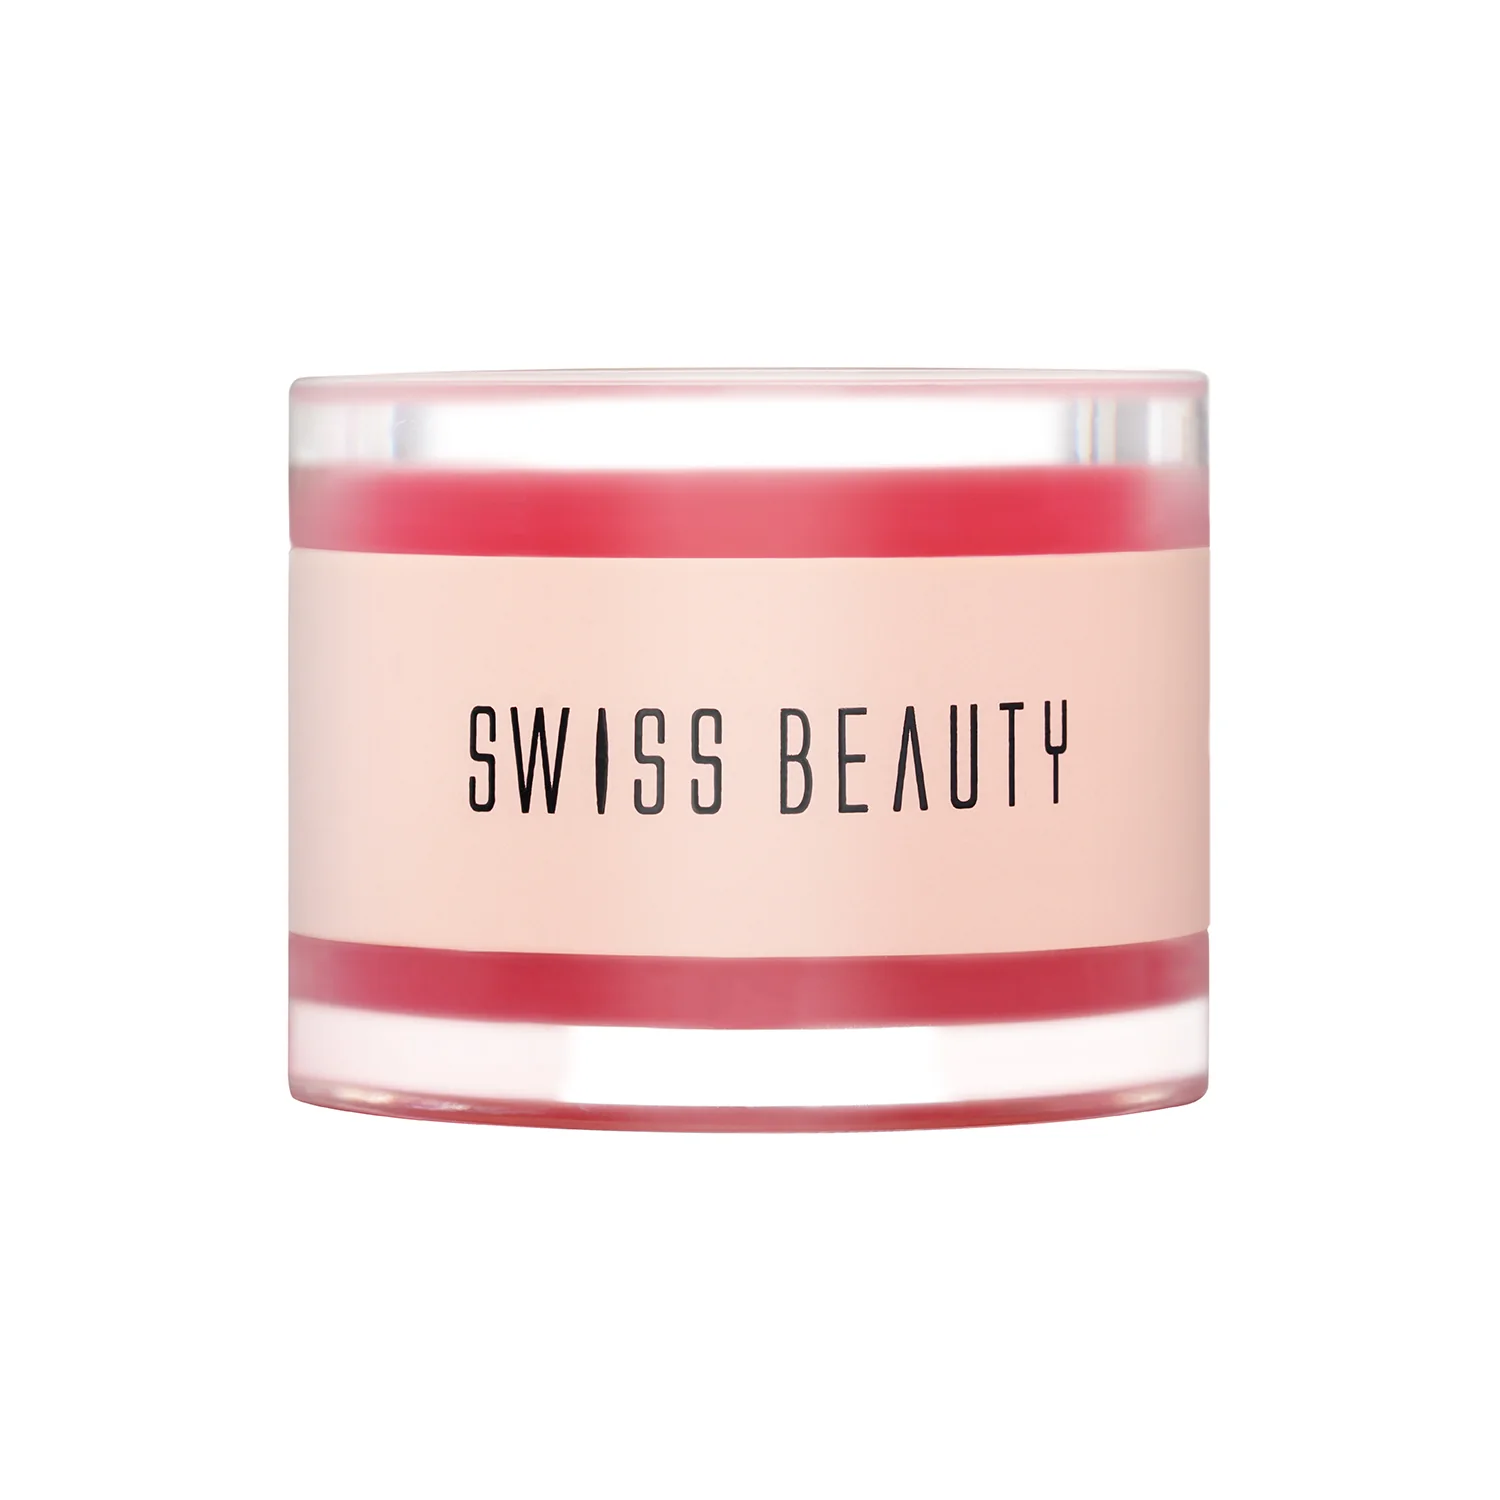 Swiss beauty lip perfect duo balm & scrub with beetroot extract